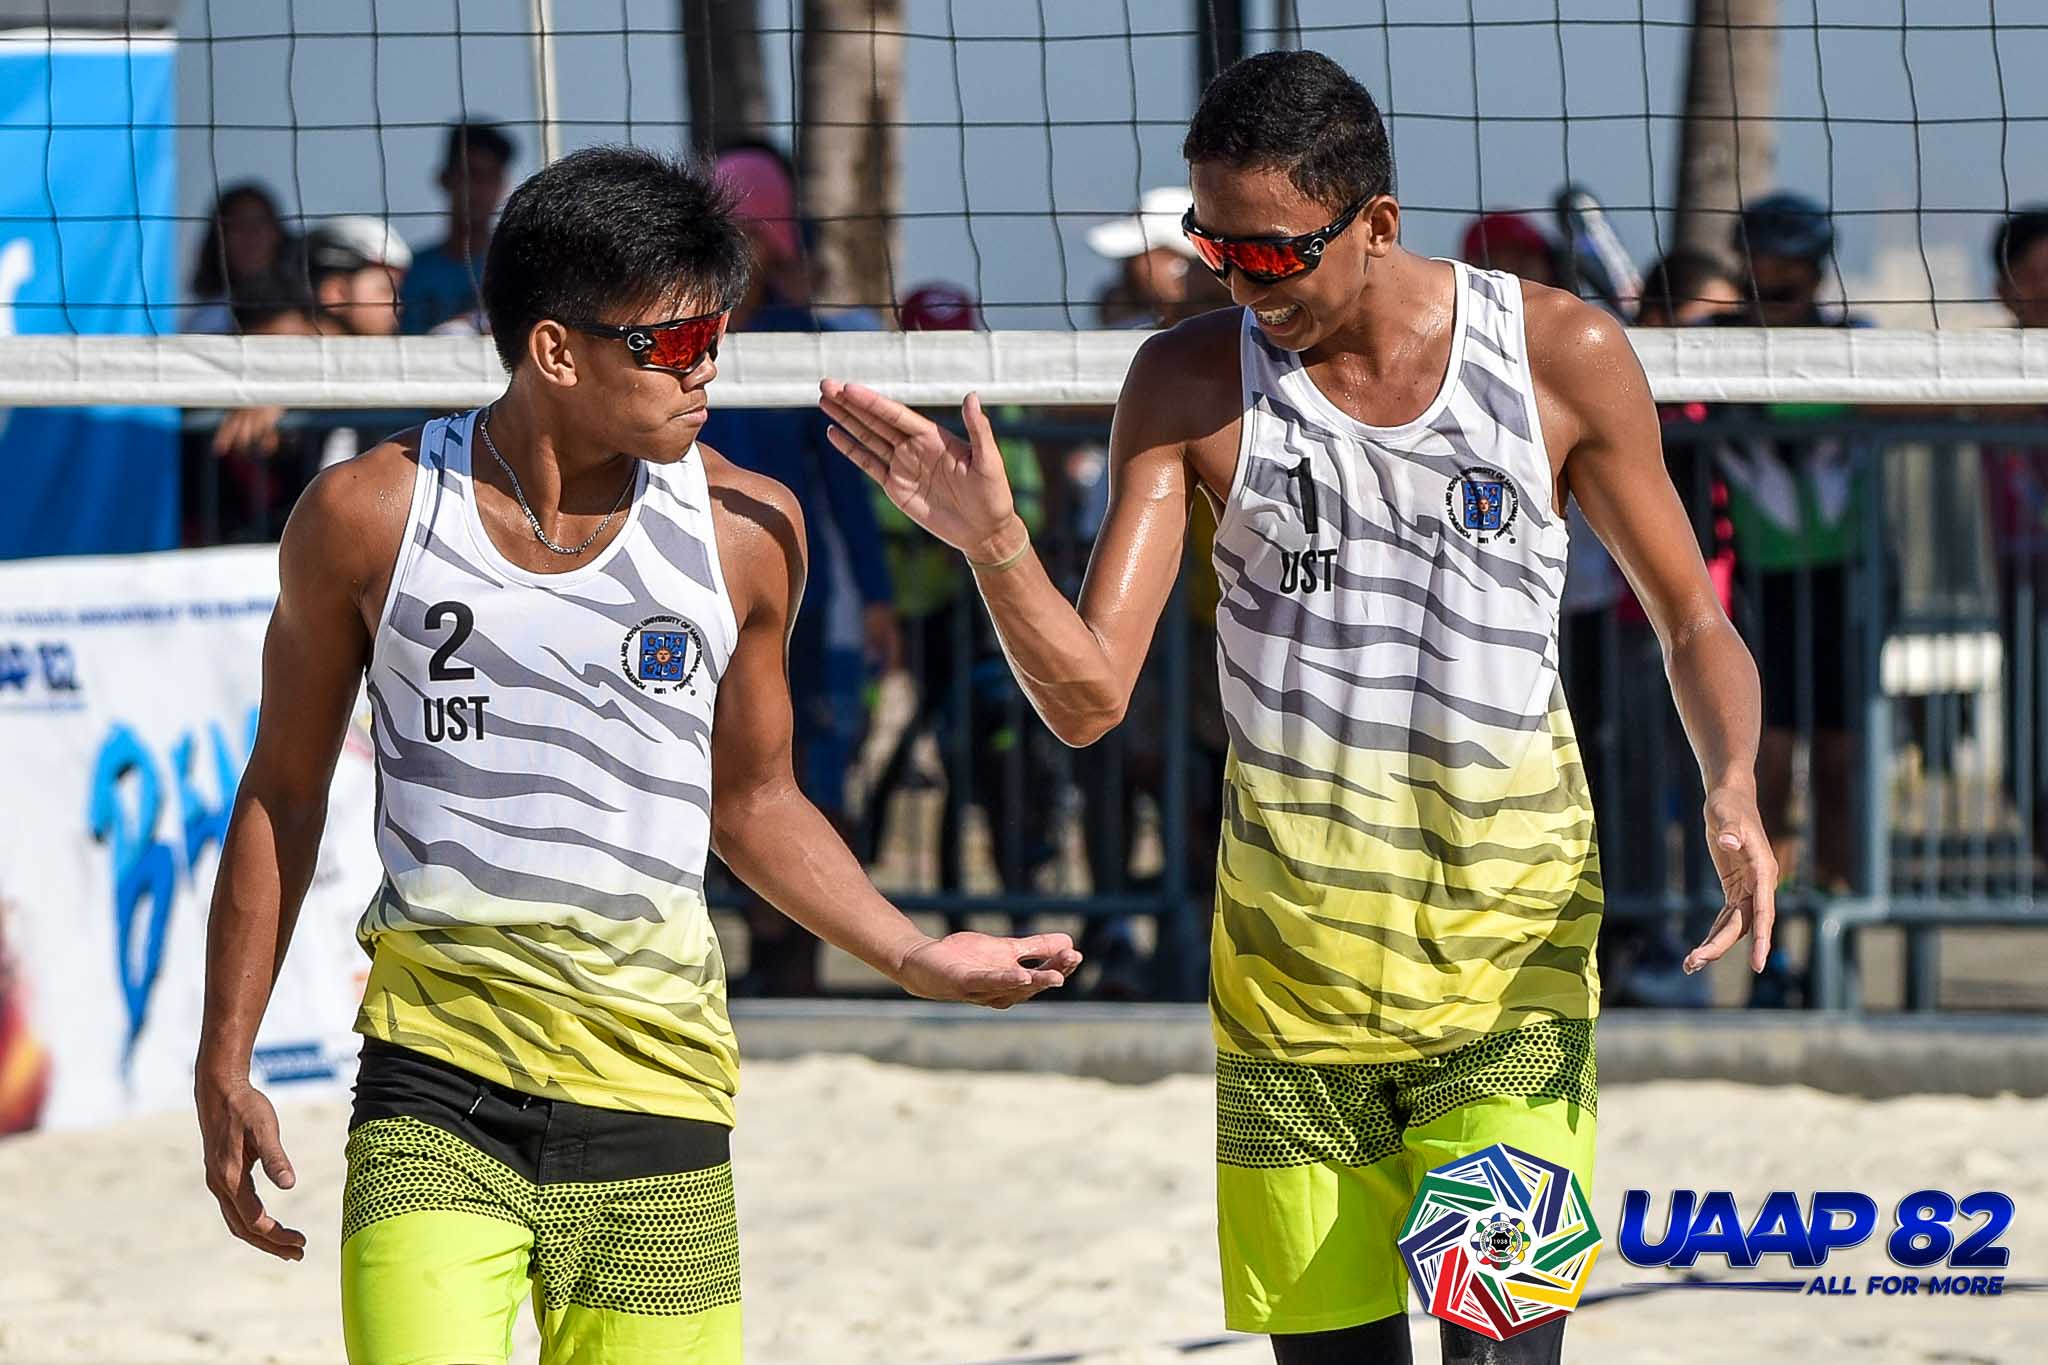 7TH-PHOTO-UST-RANCEL-VARGA-JARON-REQUINTON Buytrago, Requinton back on opposing sides after successful NT stint Beach Volleyball News NU UAAP UST  - philippine sports news